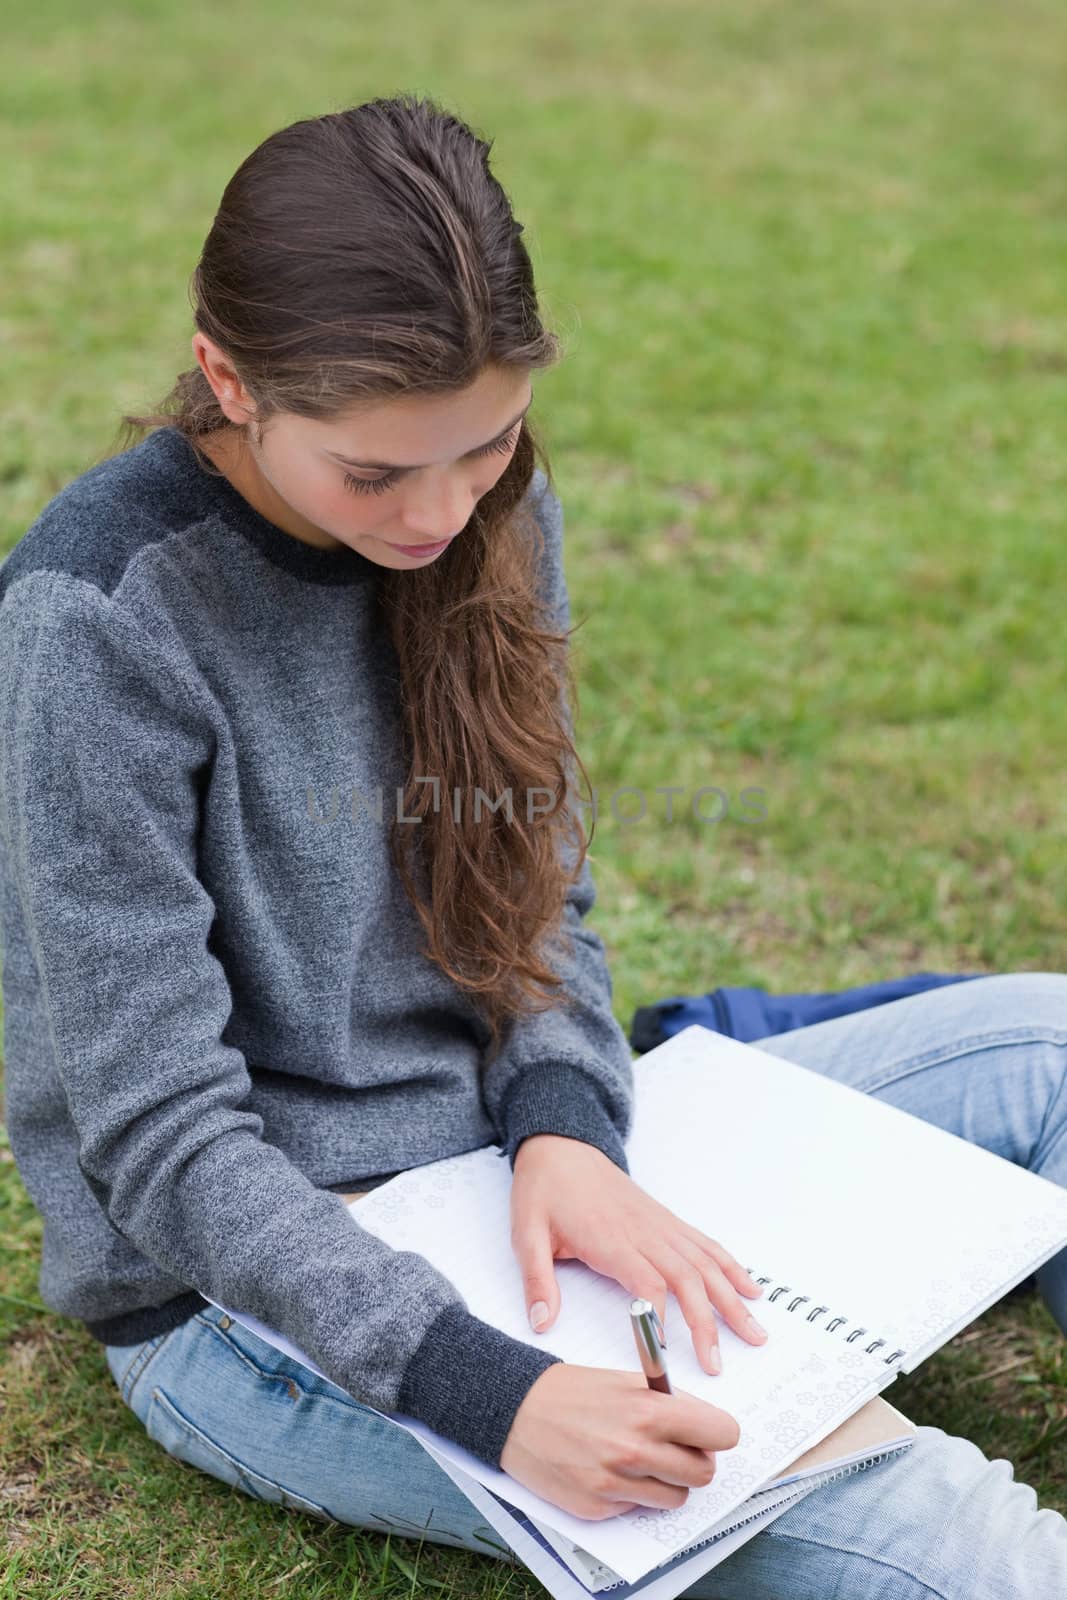 Serious student doing her homework while sitting on the grass in the countryside